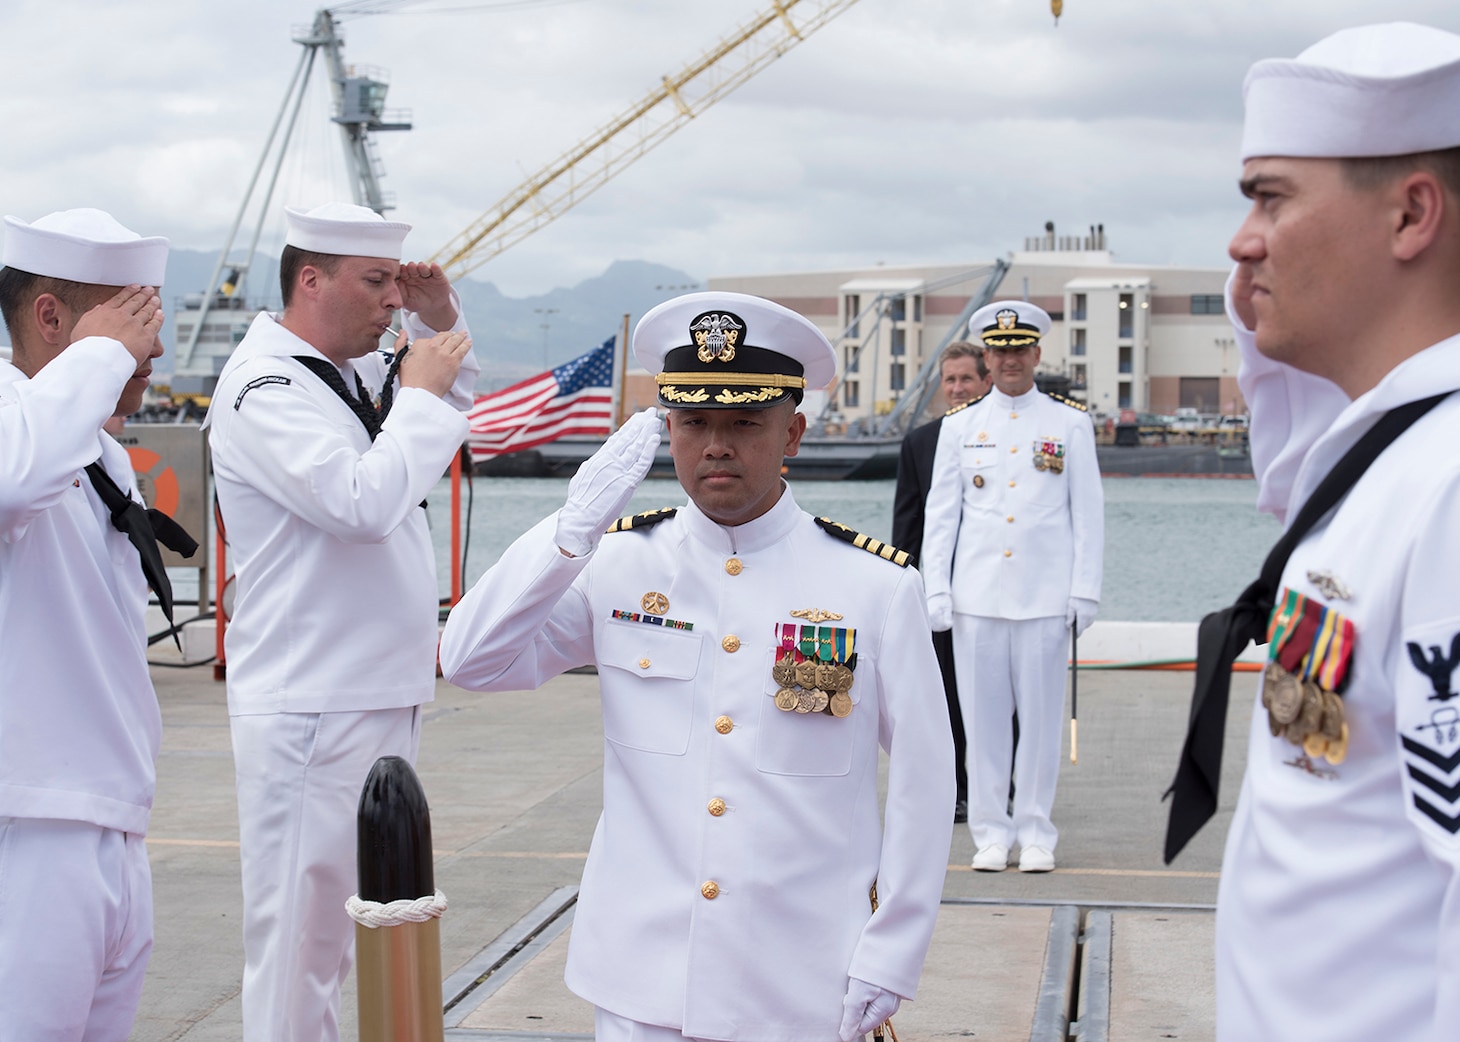 Capt. Albert Alarcon is piped aboard the Los Angeles-Class Attack submarine USS Columbus (SSN 762) for his change of command ceremony, Sept. 21. (U.S. Navy Photo by Mass Communication Specialist 2nd Class Shaun Griffin/Released)